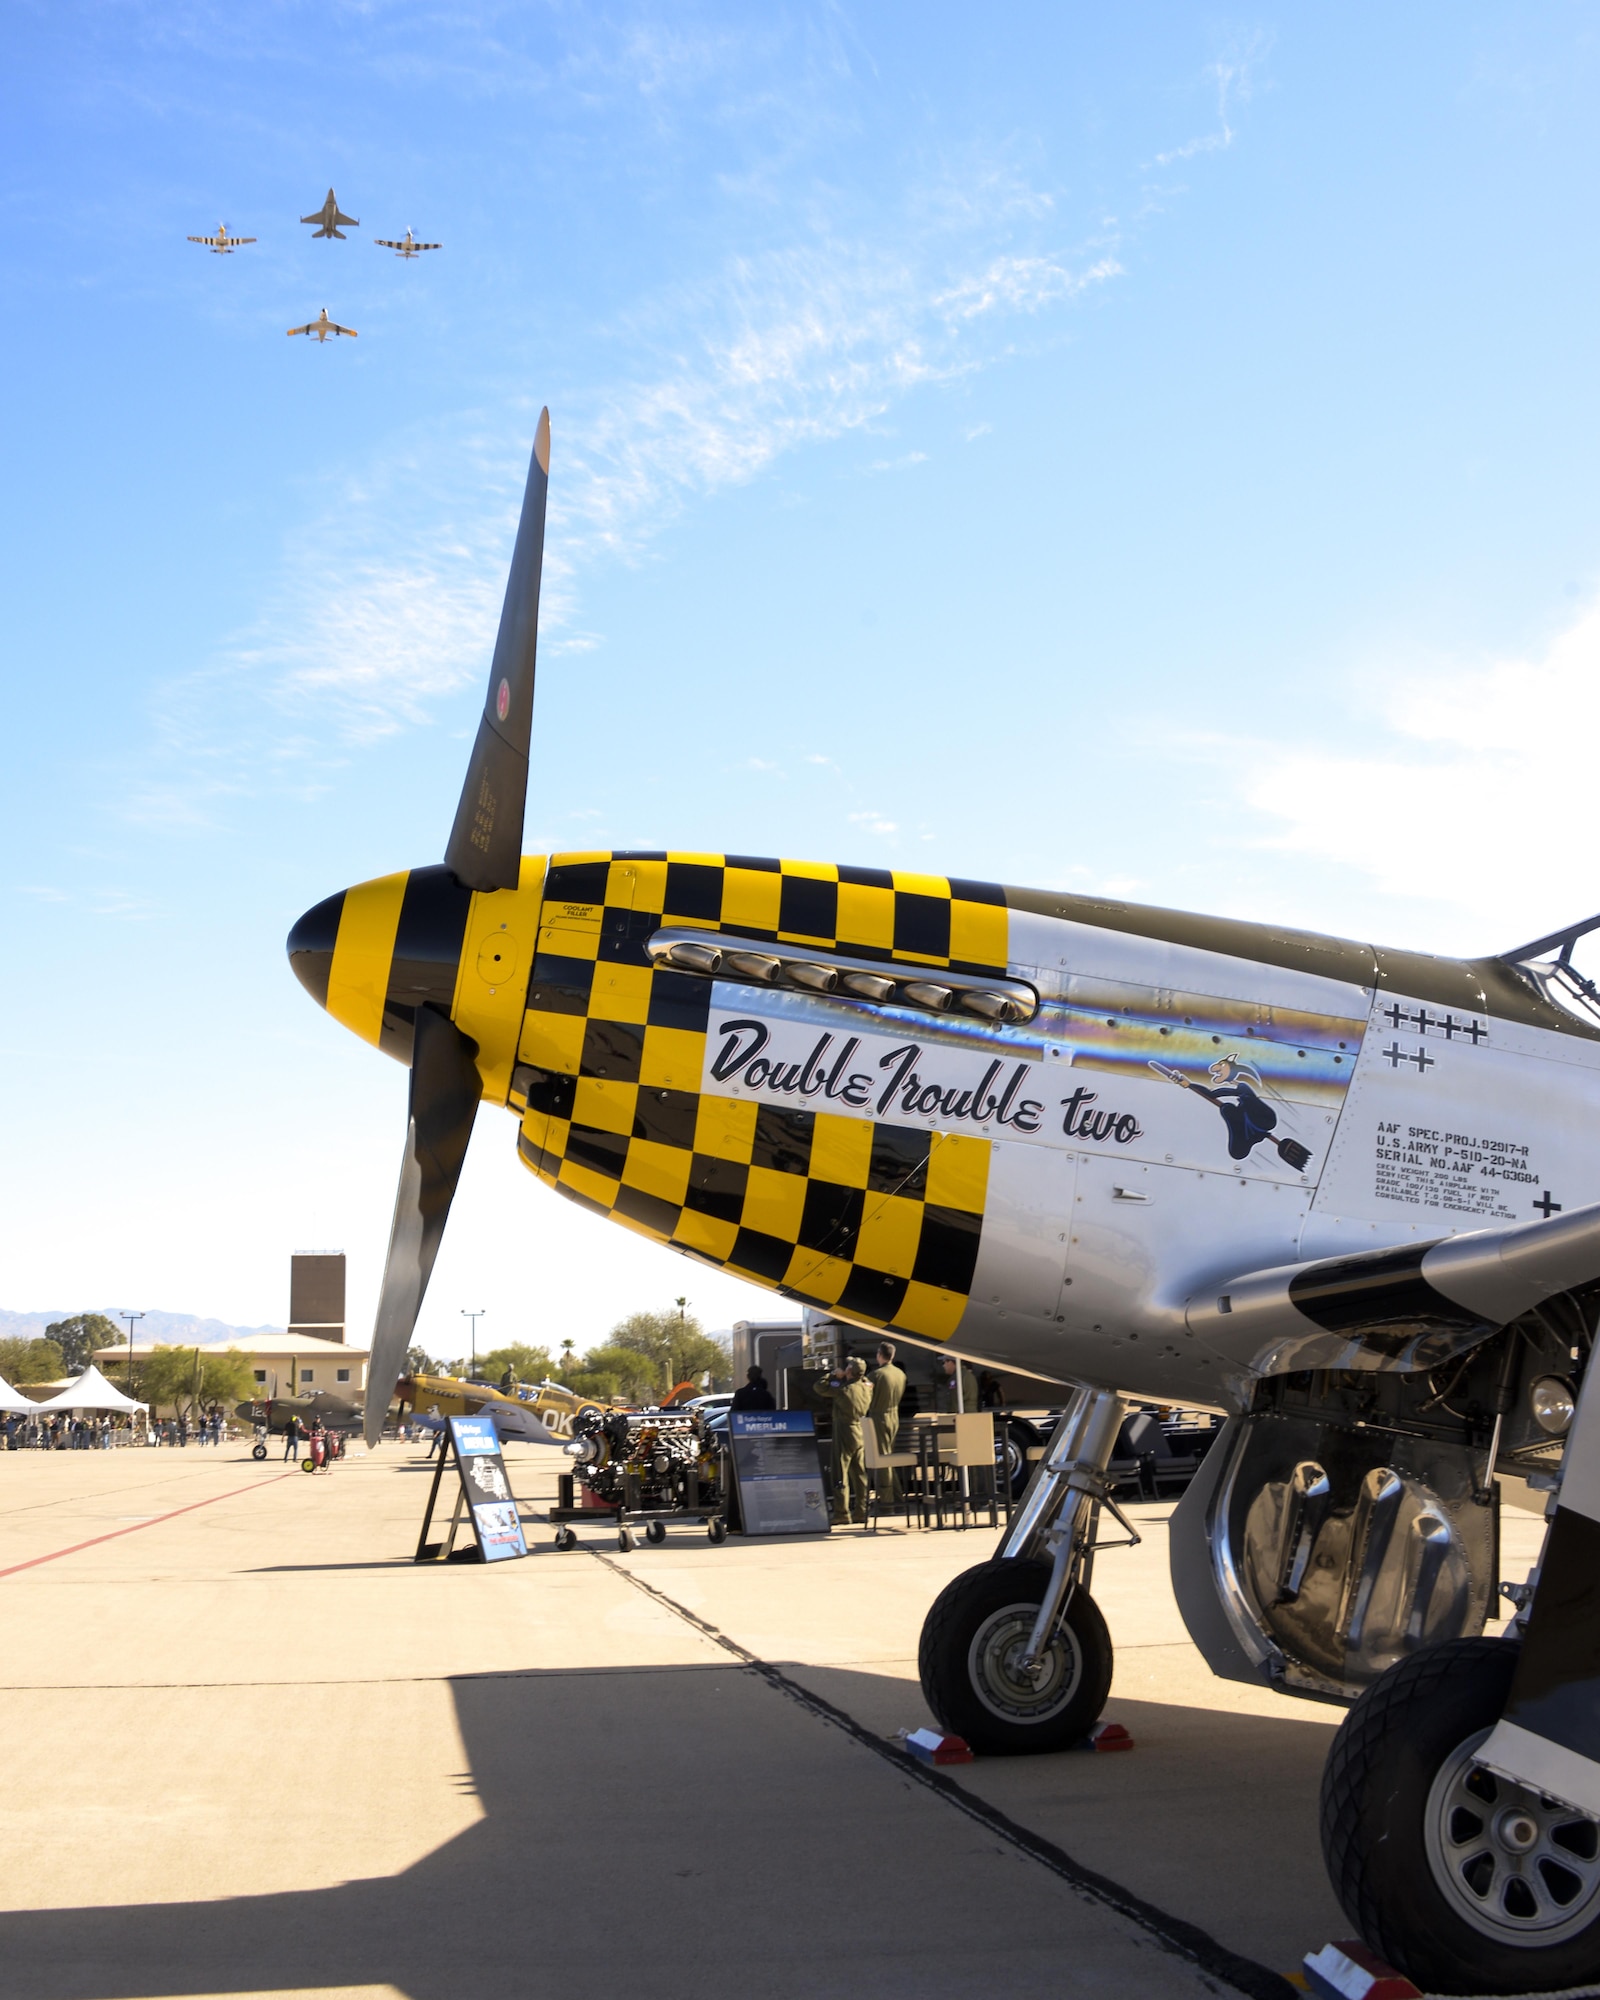 A P-51 Mustang sits on the flightline in the foreground as a U.S. Air Force F-16D Fighting Falcon, two P-51 Mustangs and an F-86 Sabre fly overhead during the 2016 Heritage Flight Training and Certification Course at Davis-Monthan Air Force Base, Ariz., March 4, 2016. Established in 1997, the HFTCC certifies civilian pilots of historic military aircraft and U.S. Air Force pilots to fly in formation together during the upcoming air show season. (U.S. Air Force photo by Senior Airman Chris Massey/Released)